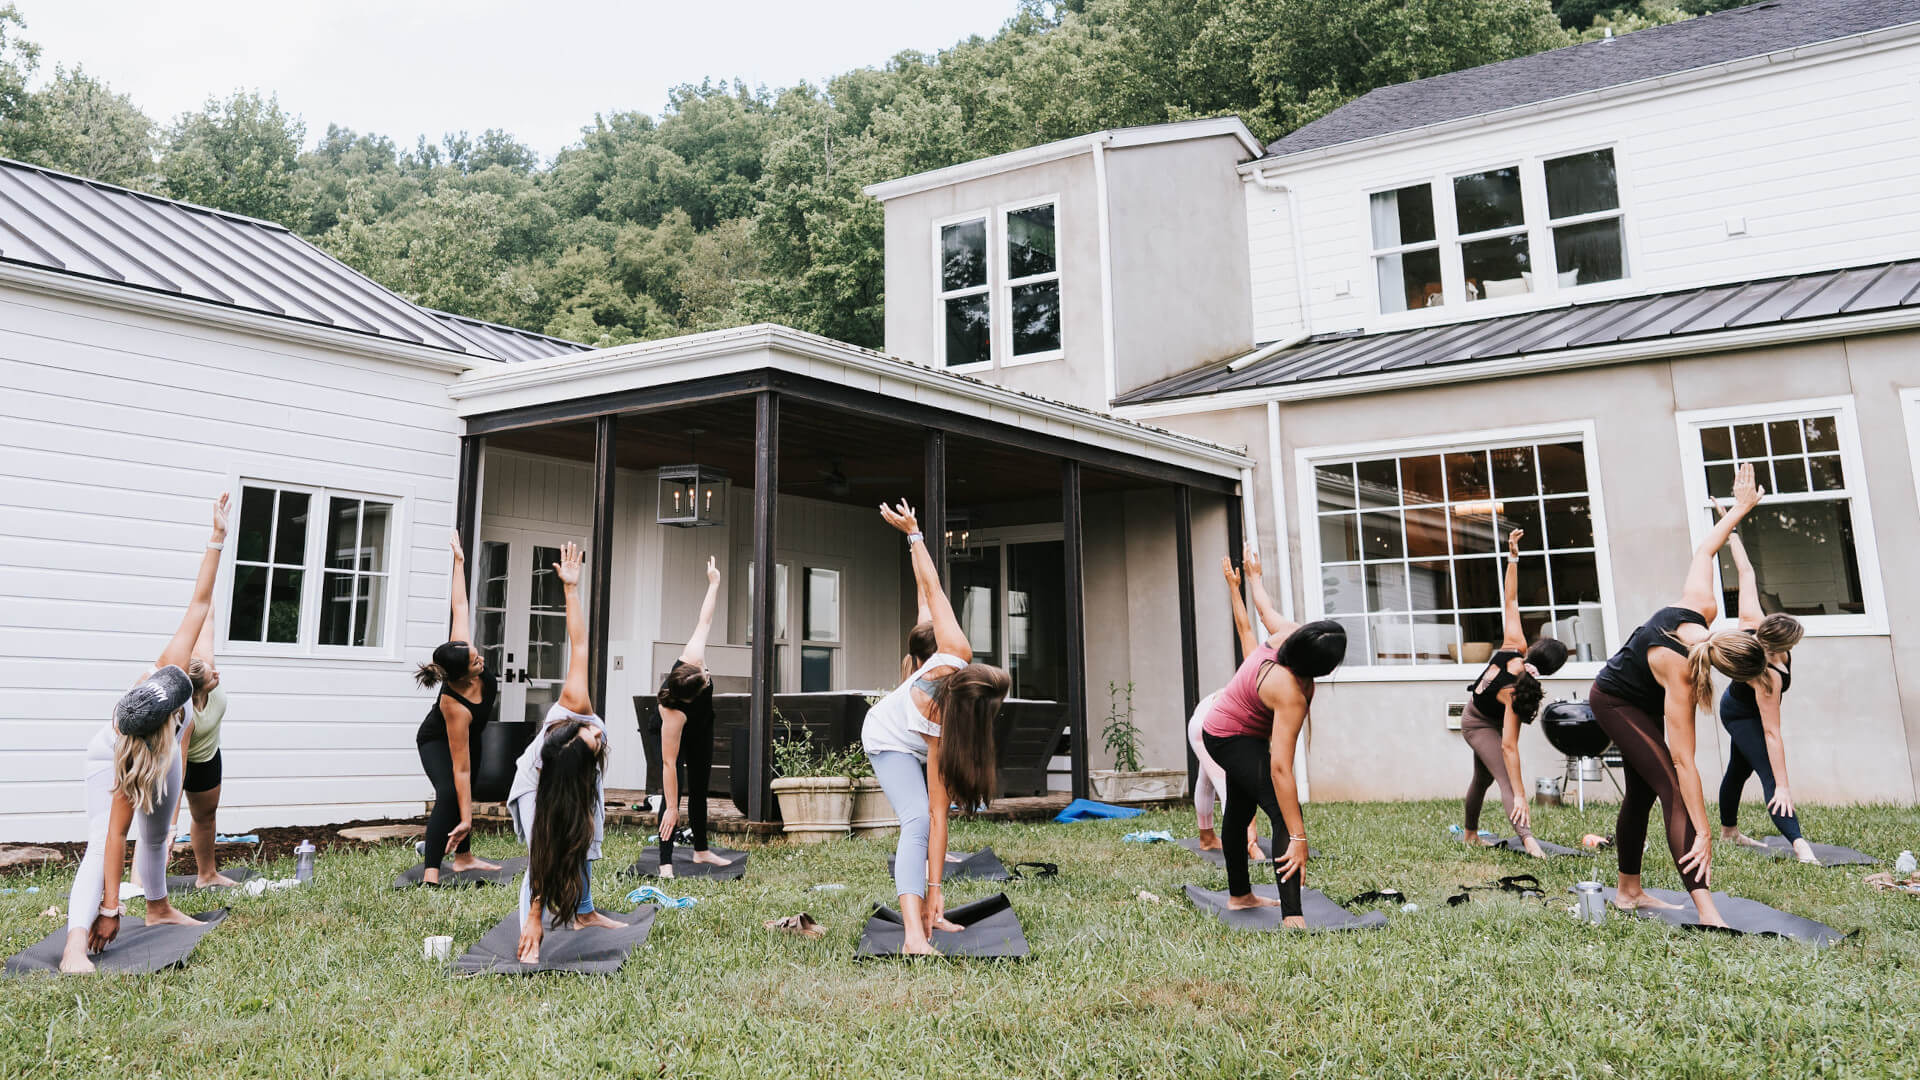 Private yoga session for bachelorette party at their vacation rental in Asheville, NC.